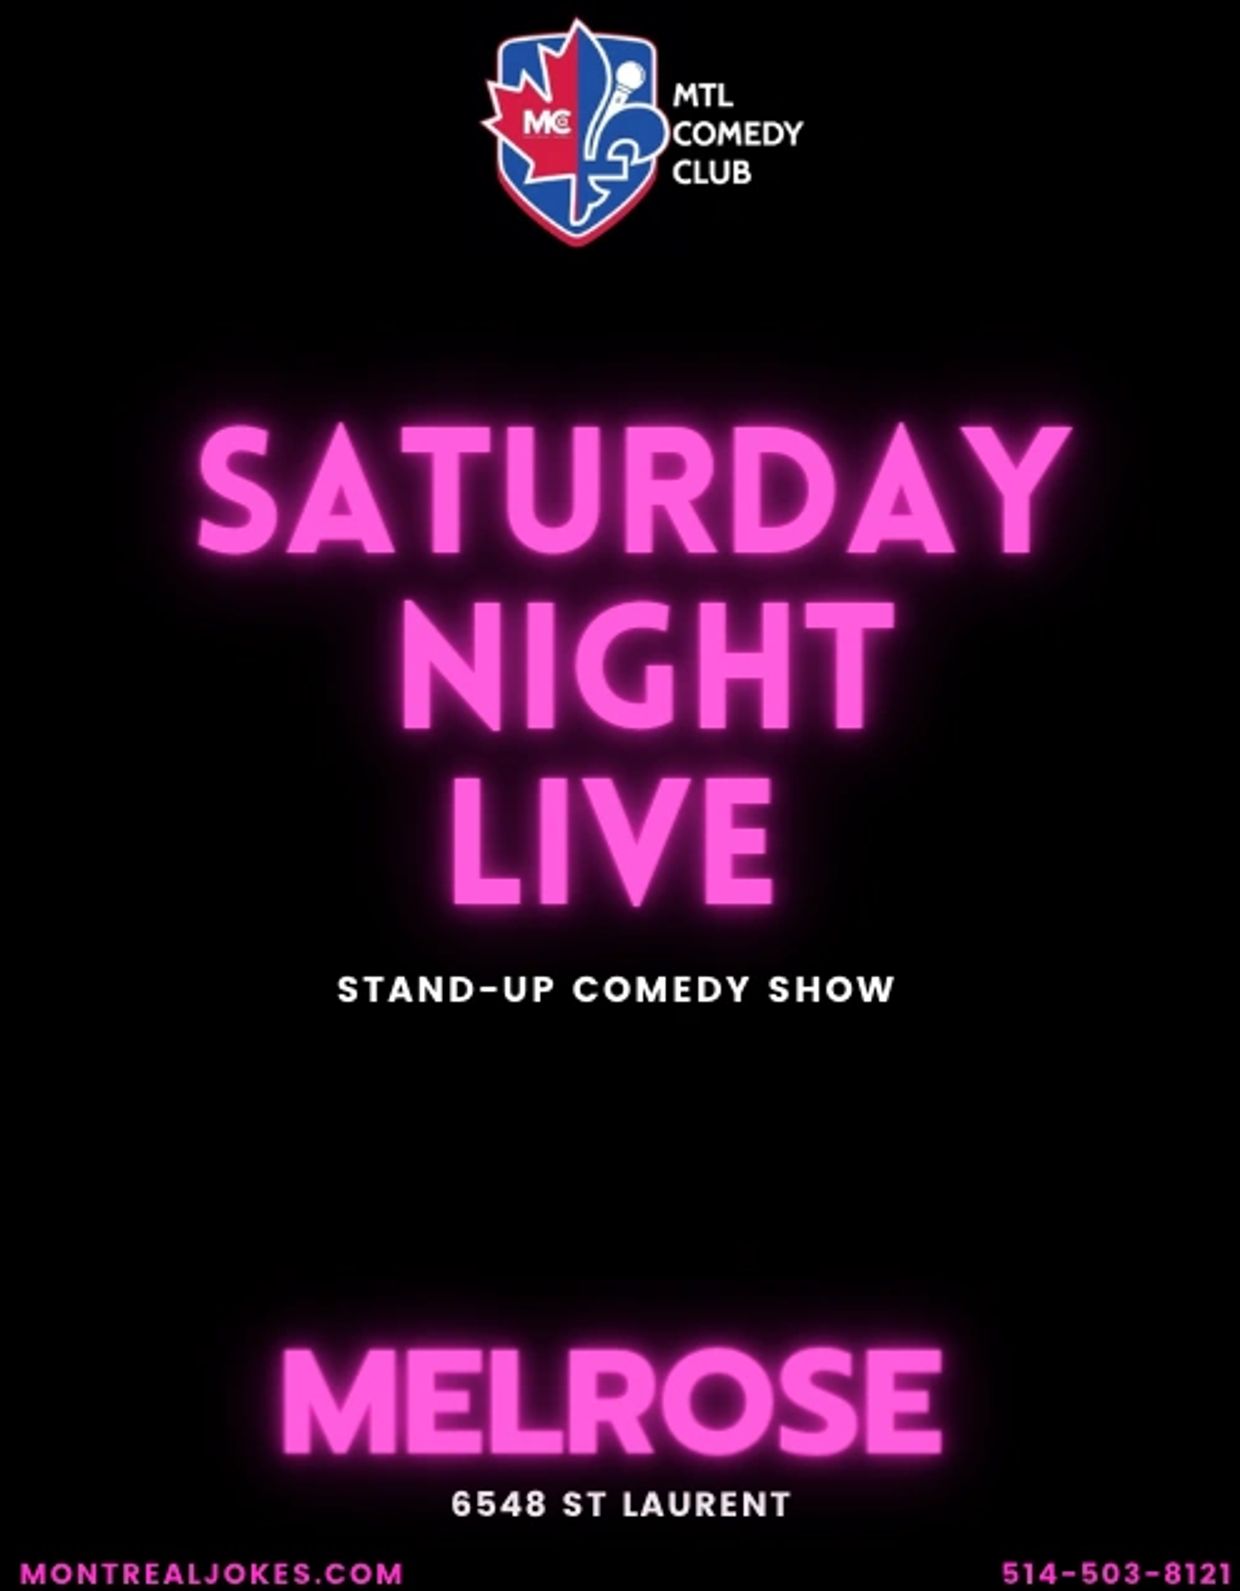 SATURDAY NIGHT LIVE A STAND-UP COMEDY SHOW TAKING PLACE AT MELROSE LOCATED AT 6548 ST LAURENT.